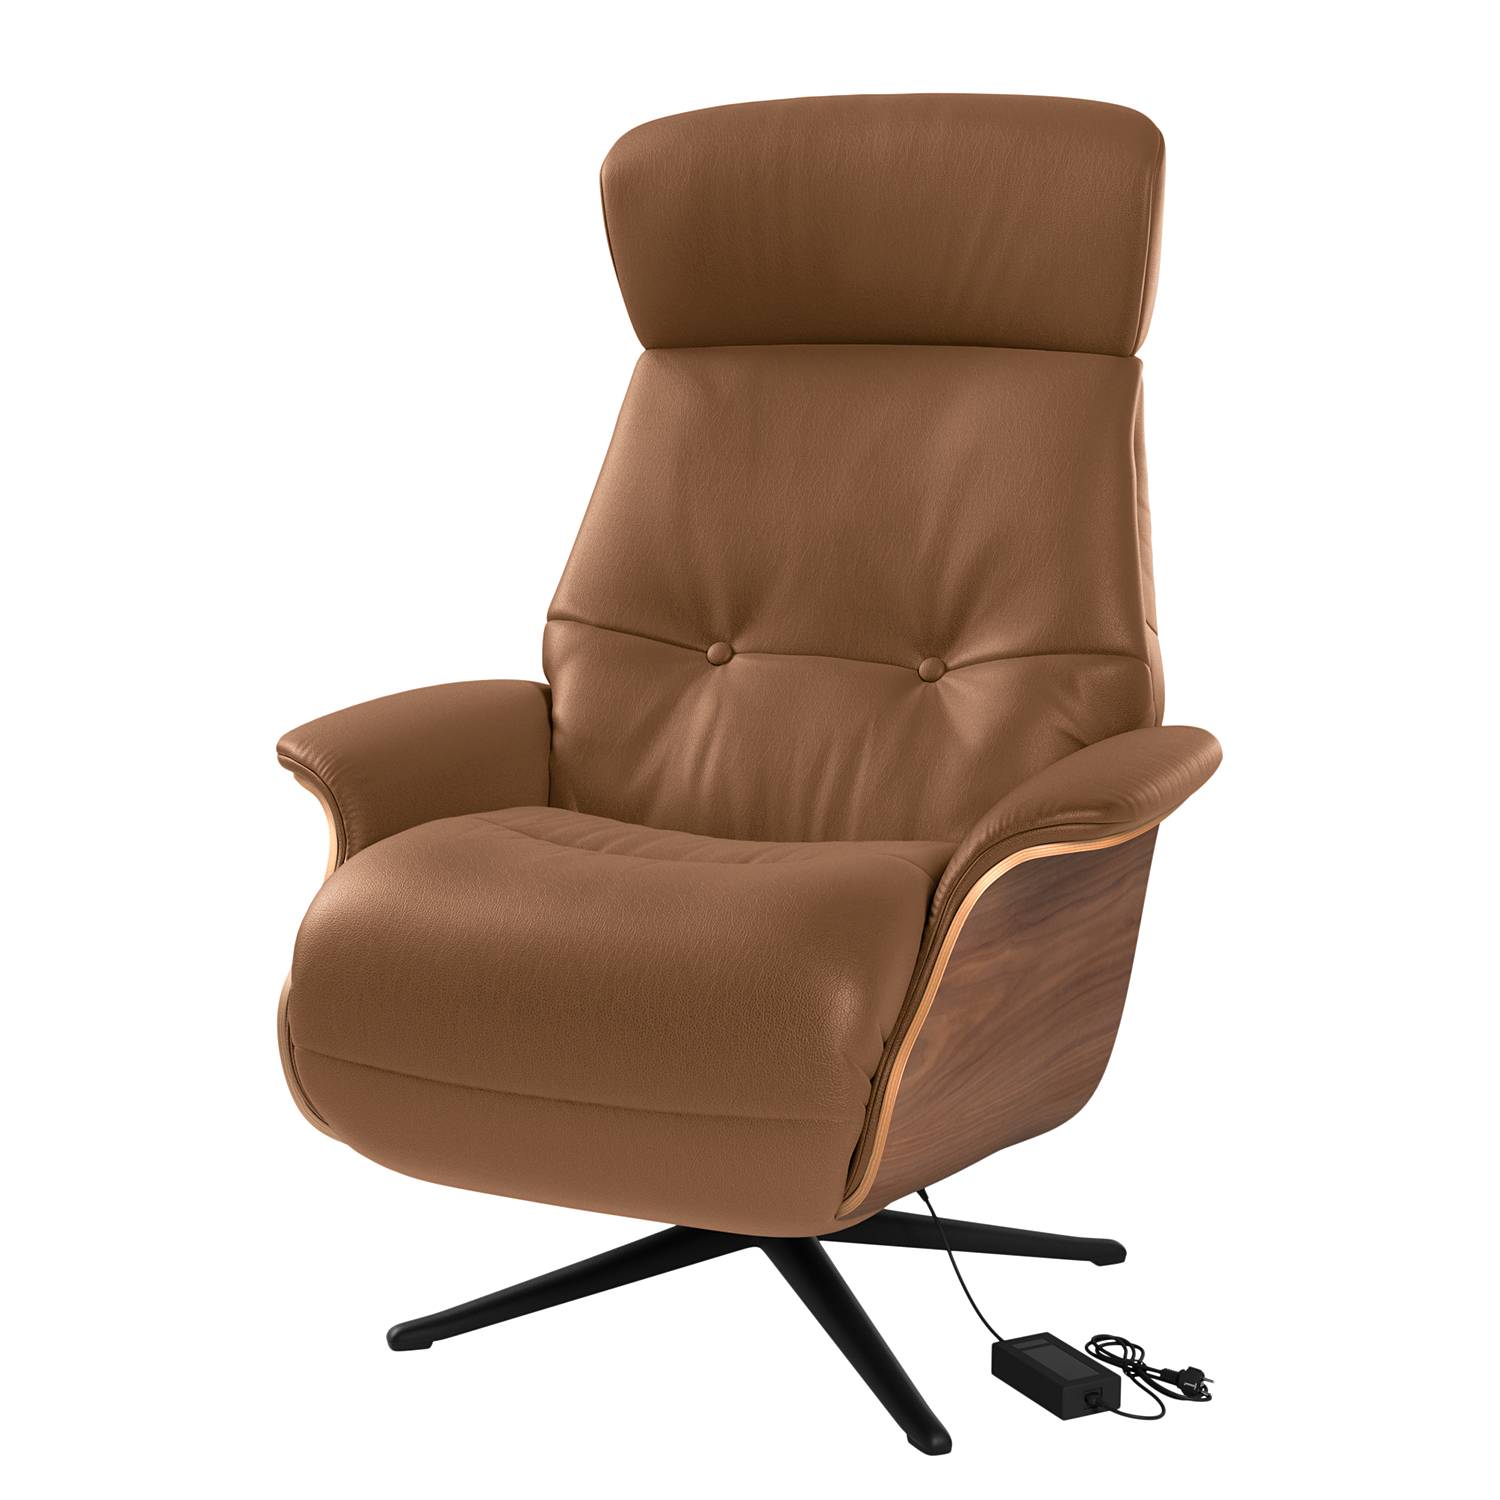 Image of Fauteuil relax Anderson VI 000000001000131404